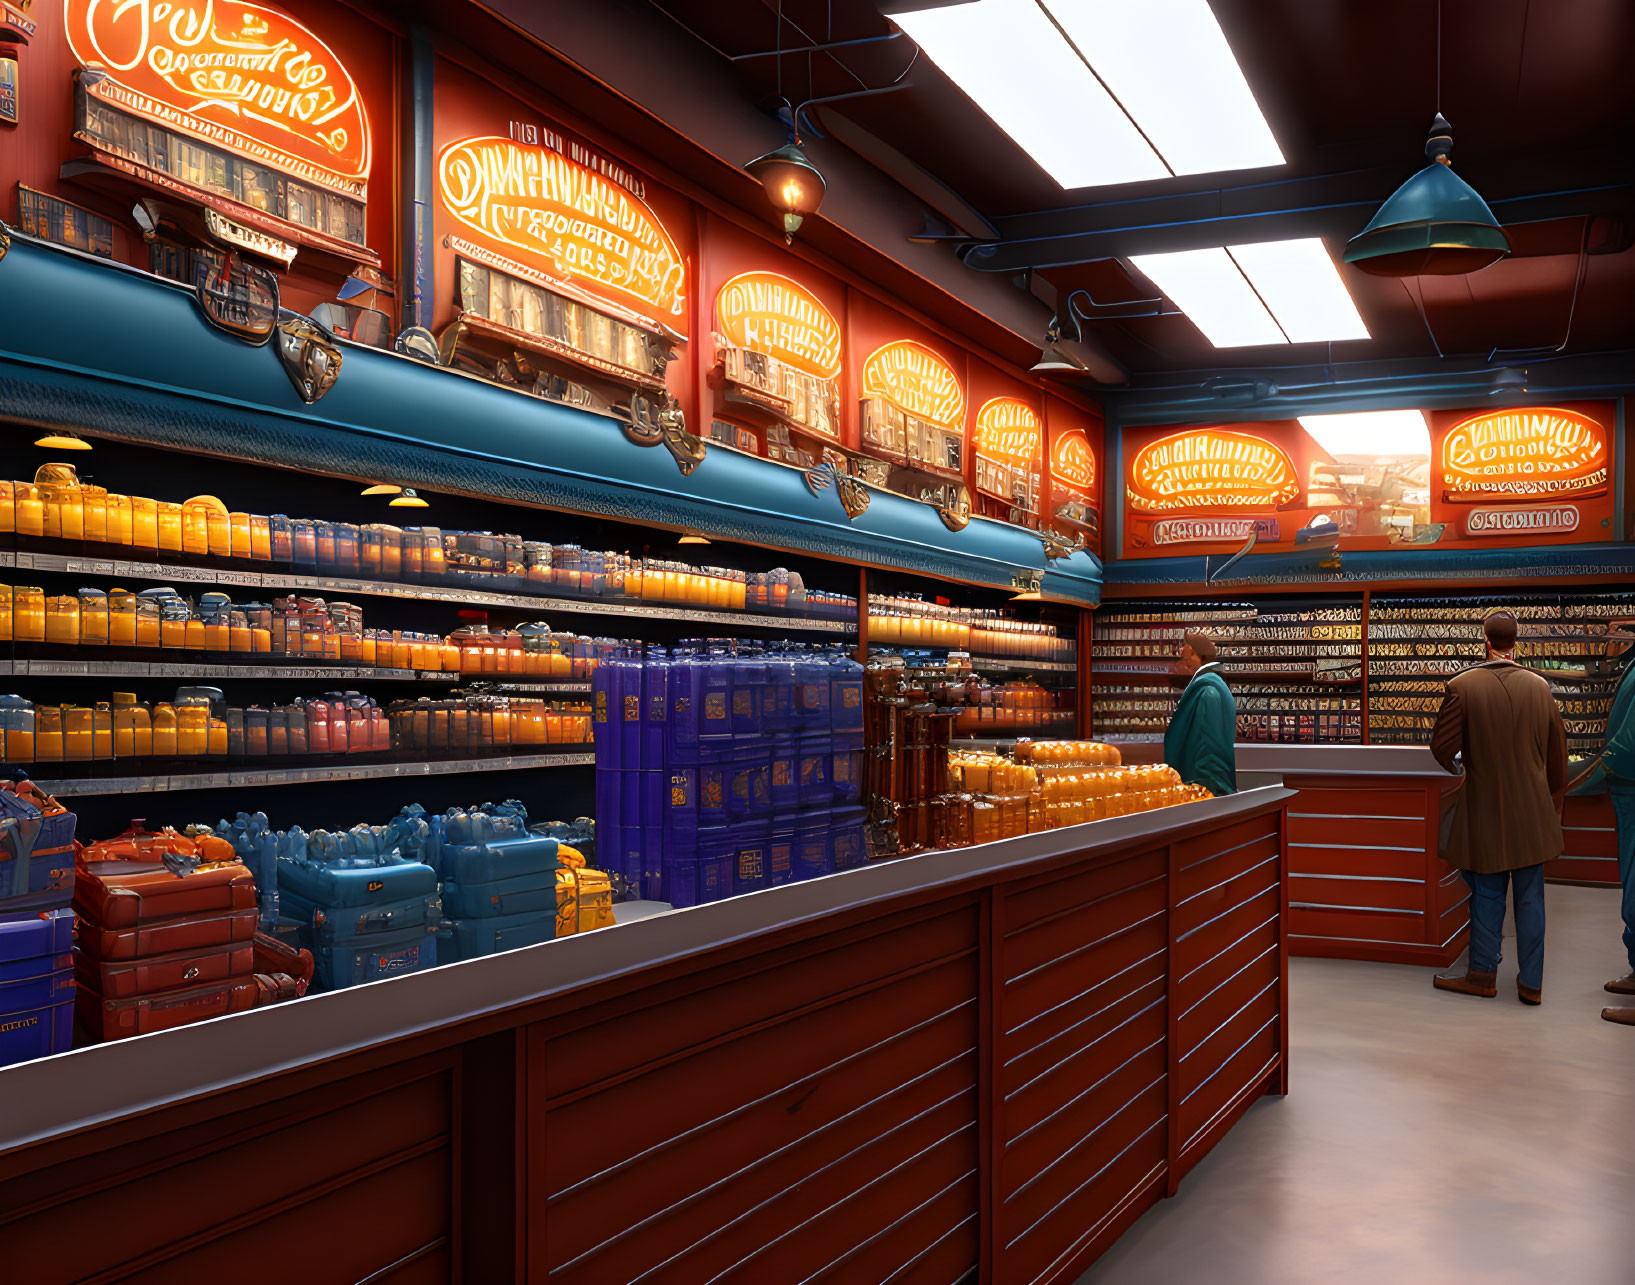 Colorful candy store interior with stocked shelves, browsing customers, and vintage decor.